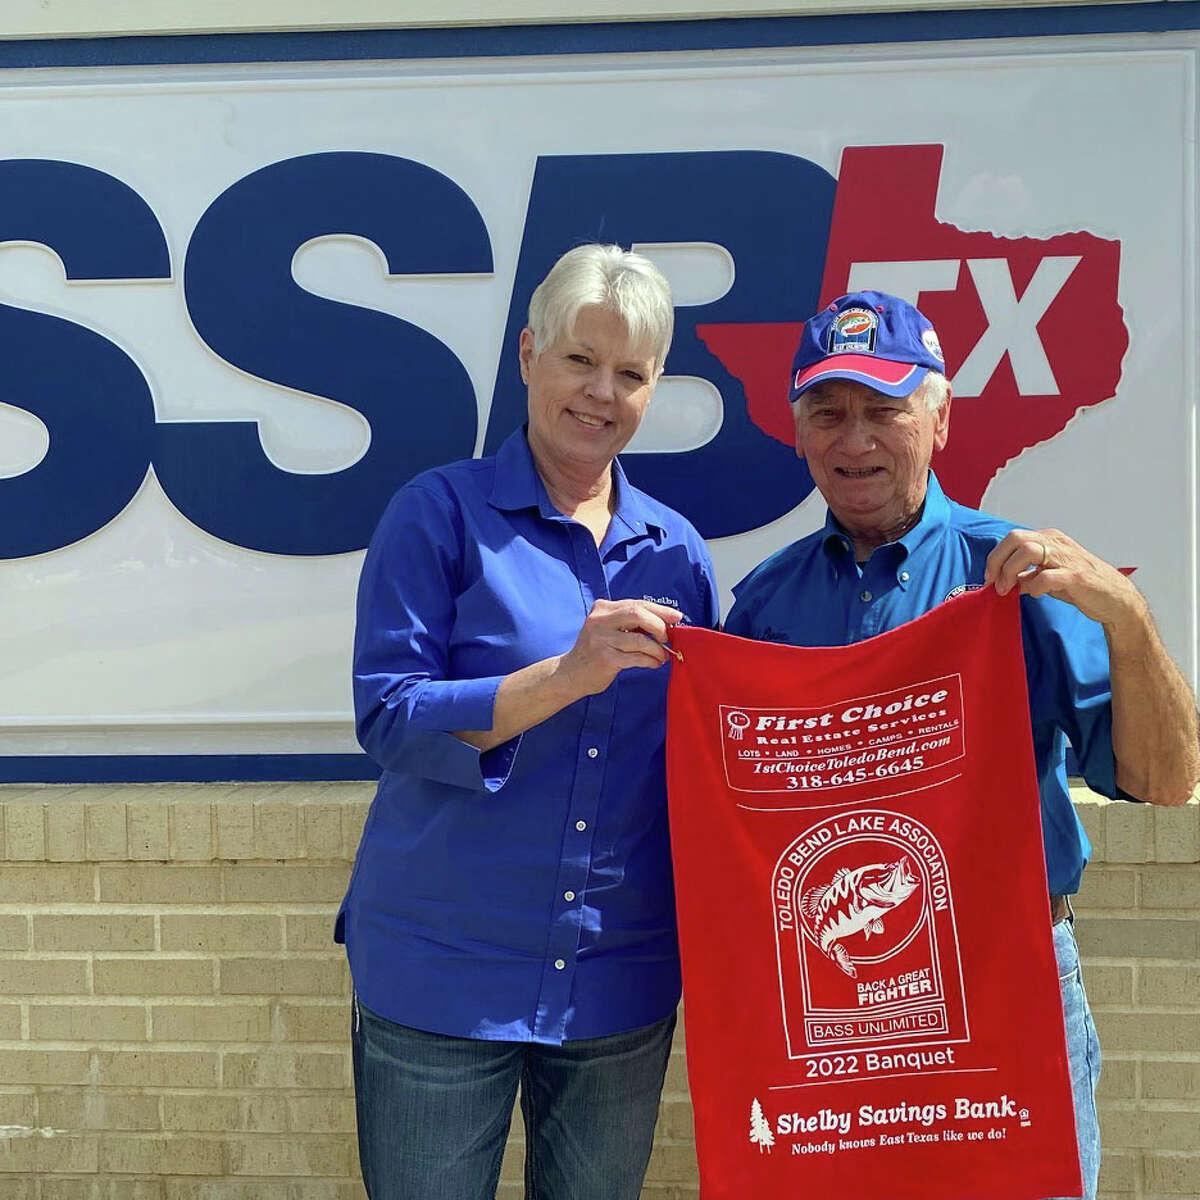 Shelby Savings Bank of Hemphill is a co-sponsor of the fishing towels.  Pictured is Dee Schrieber, Branch Manager with TBLA BU Coordinator Ted Dove.